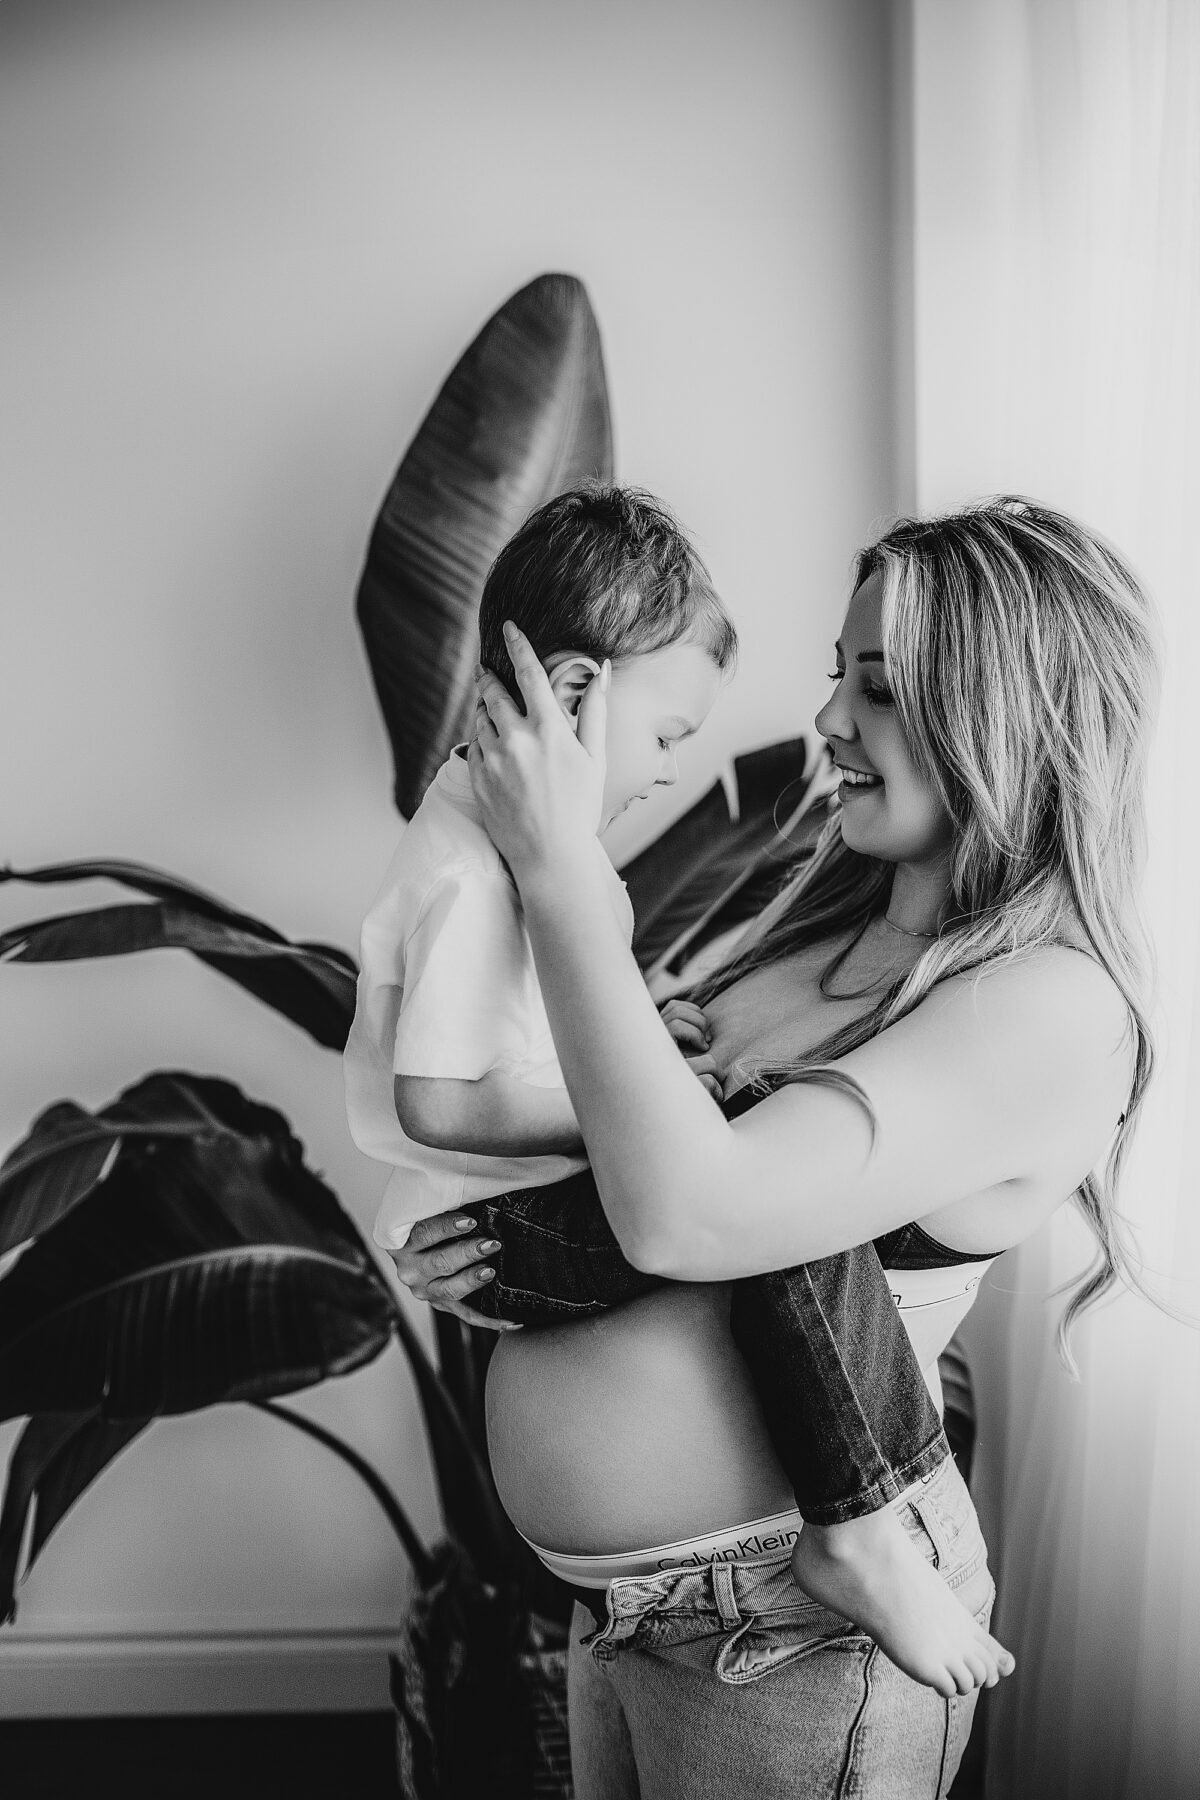 calvin klein maternity, edmonton maternity photographer, edmonton newborn photographer, edmonton maternity photographers, edmonton newborn photographers, high fashion, maternity gown, casual studio maternity, fabric tossing, sibling maternity